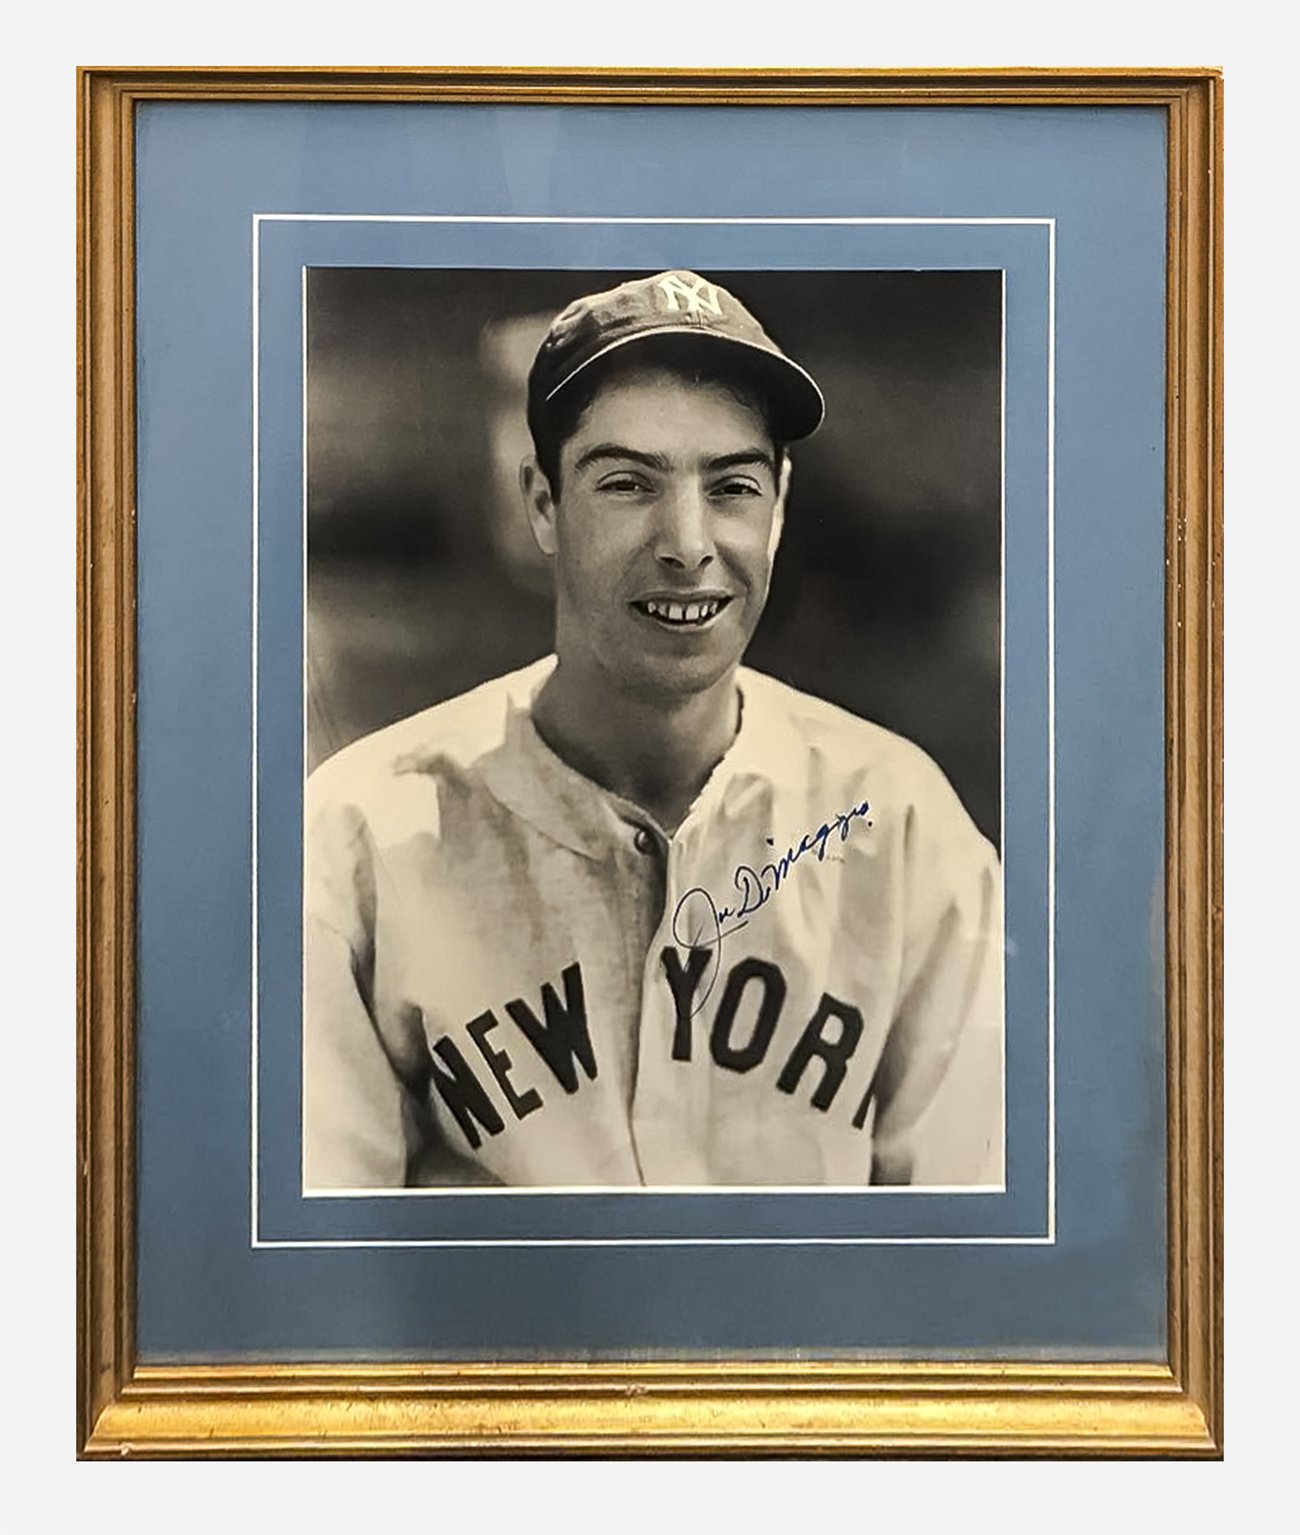 Paul O'neill Signed Autographed Framed New York Yankees 